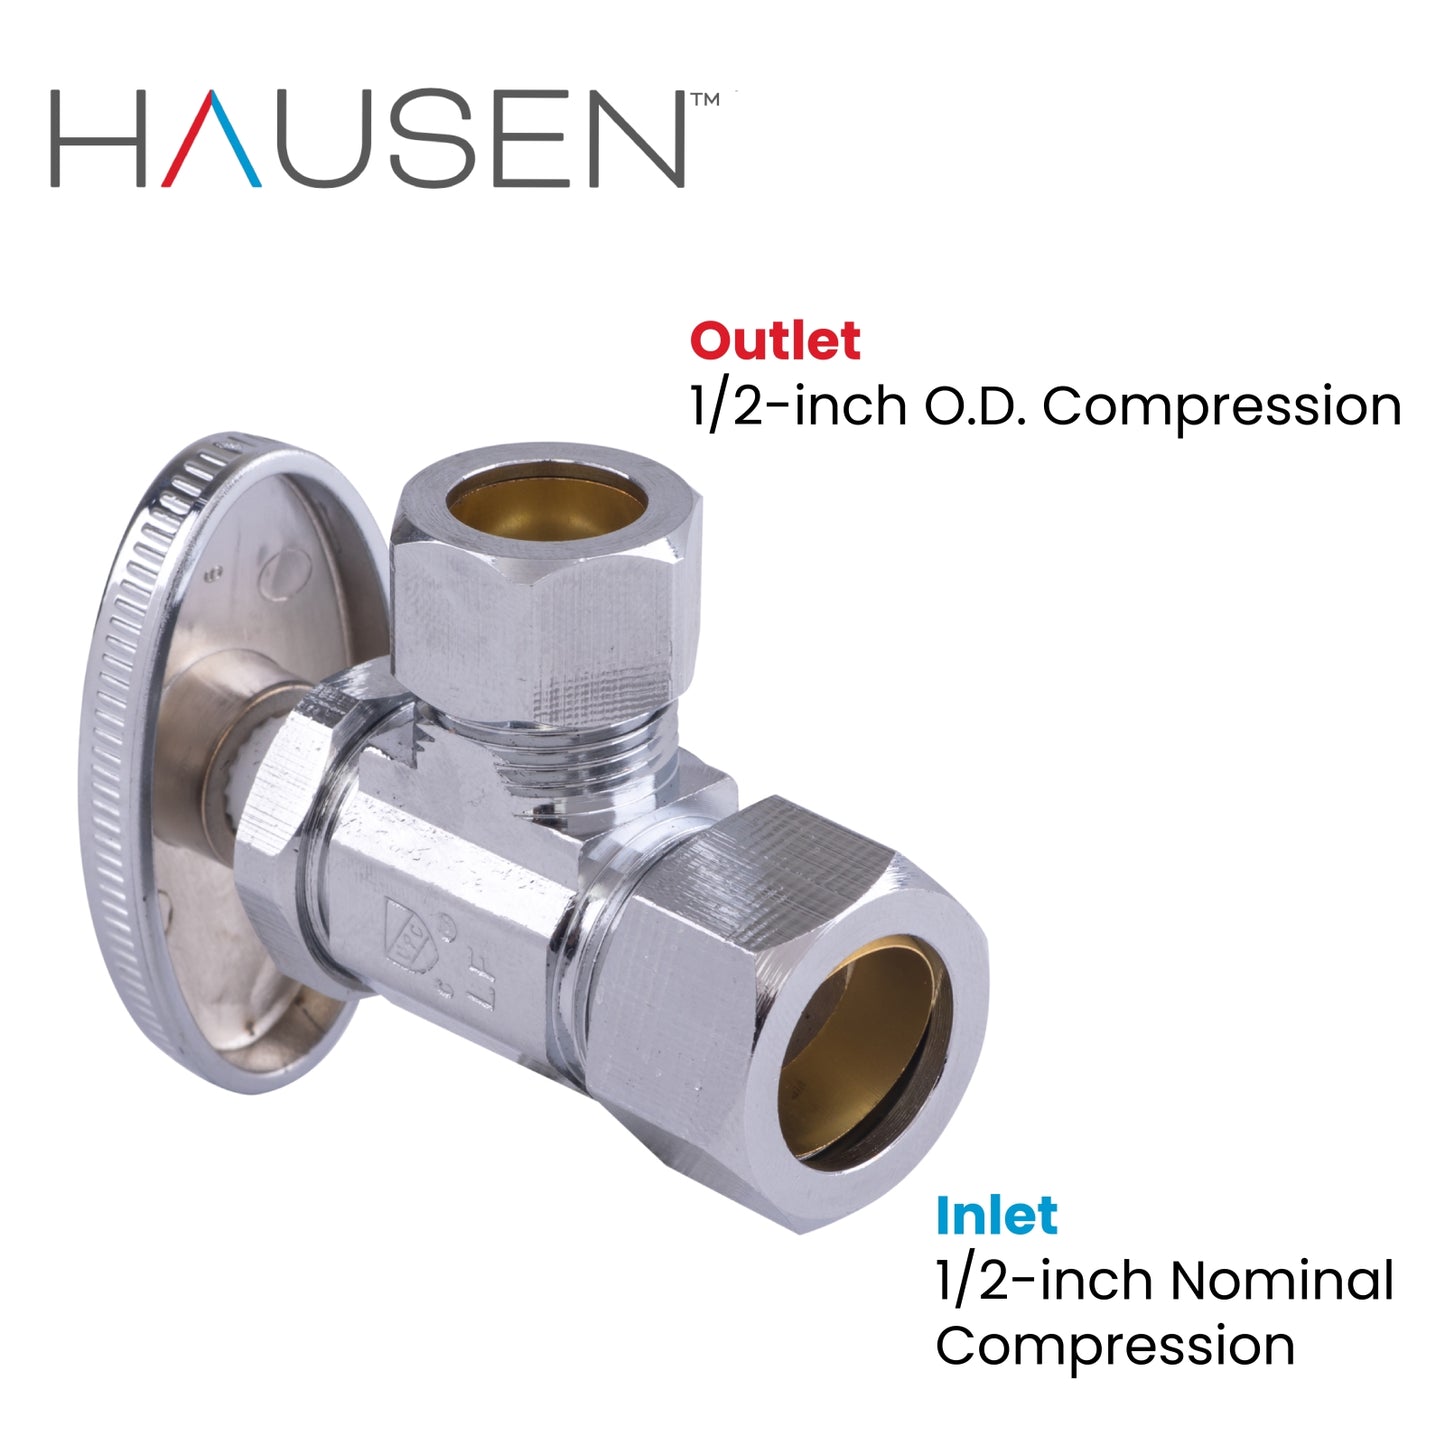 Hausen 1/2-inch Nominal Compression Inlet x 1/2-inch O.D. Compression Outlet Multi-Turn Angle Water Stop, 1-Pack